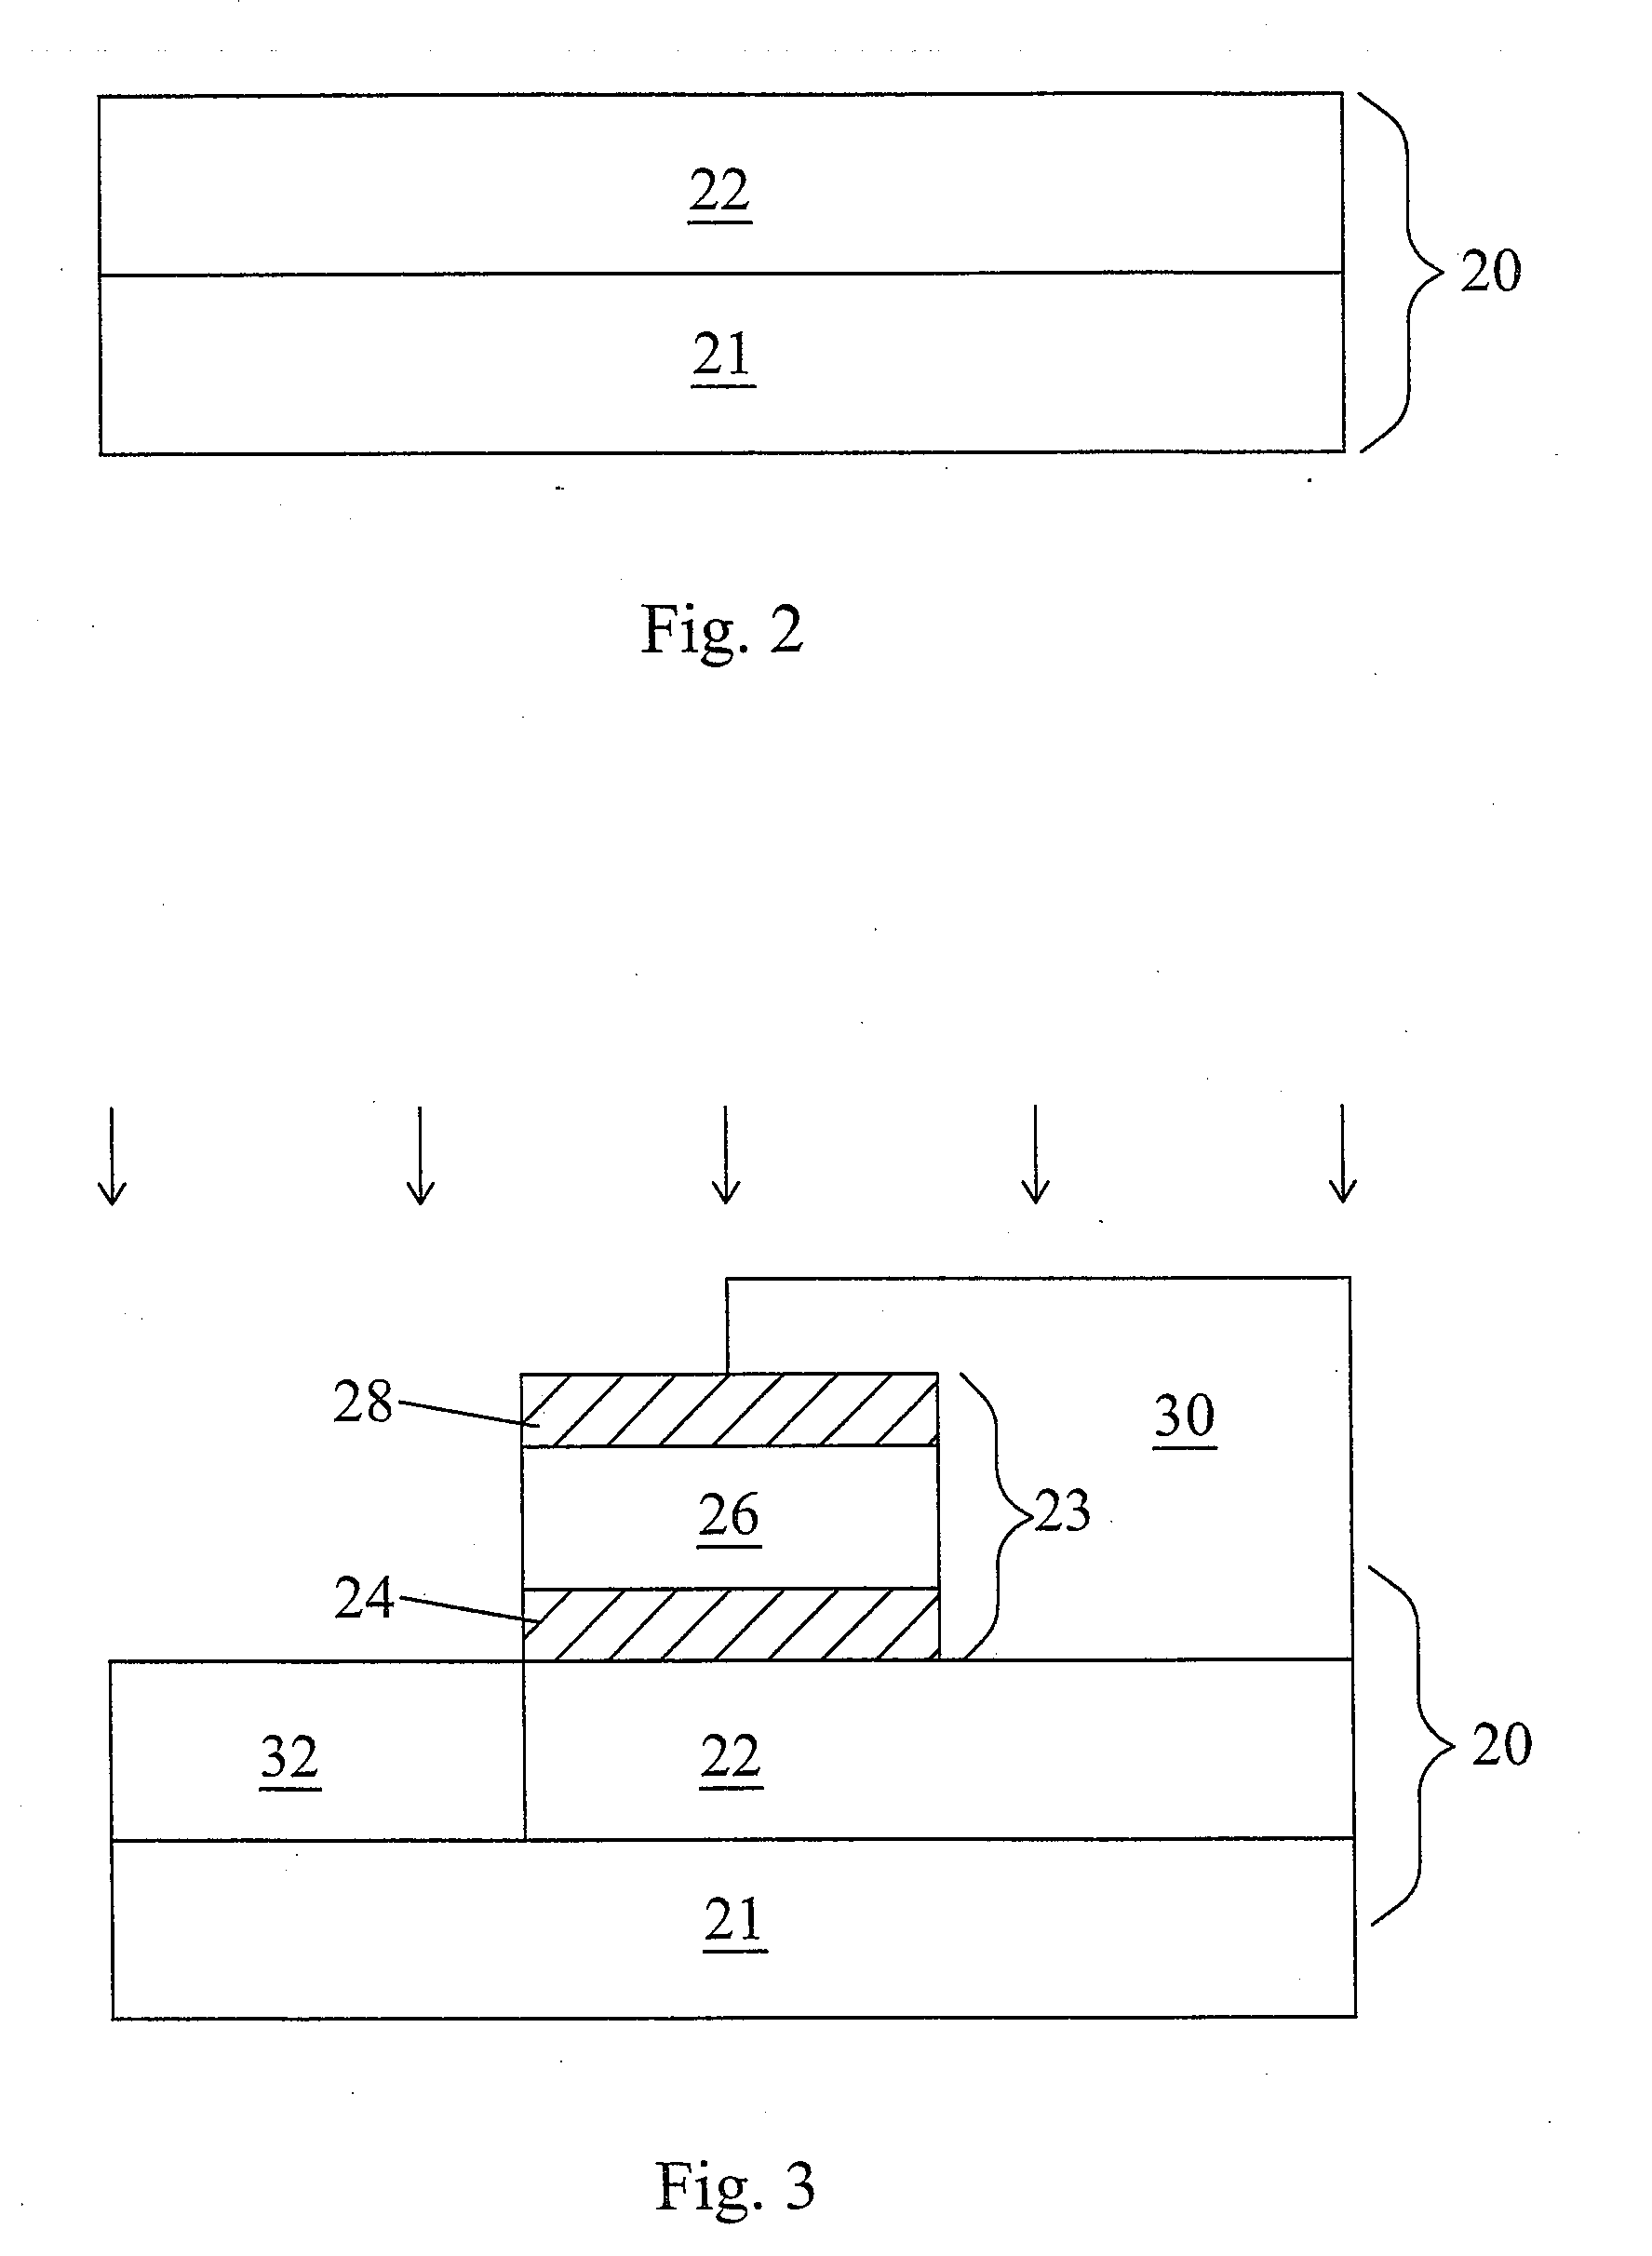 Tunnel Field-Effect Transistor with Metal Source